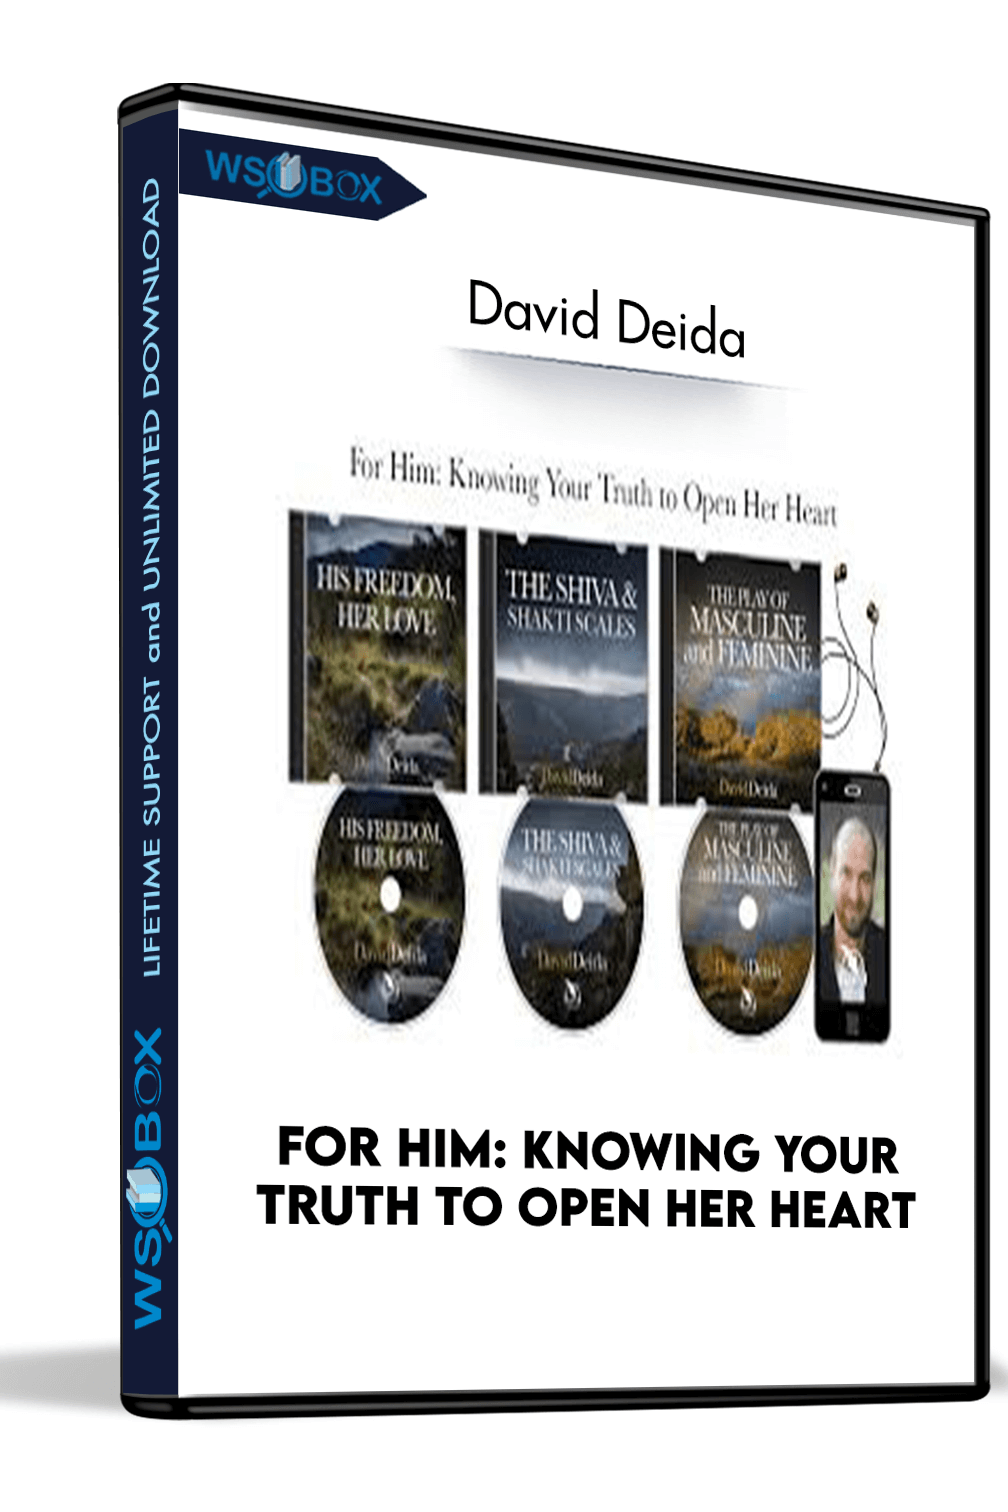 for-him-knowing-your-truth-to-open-her-heart-david-deida